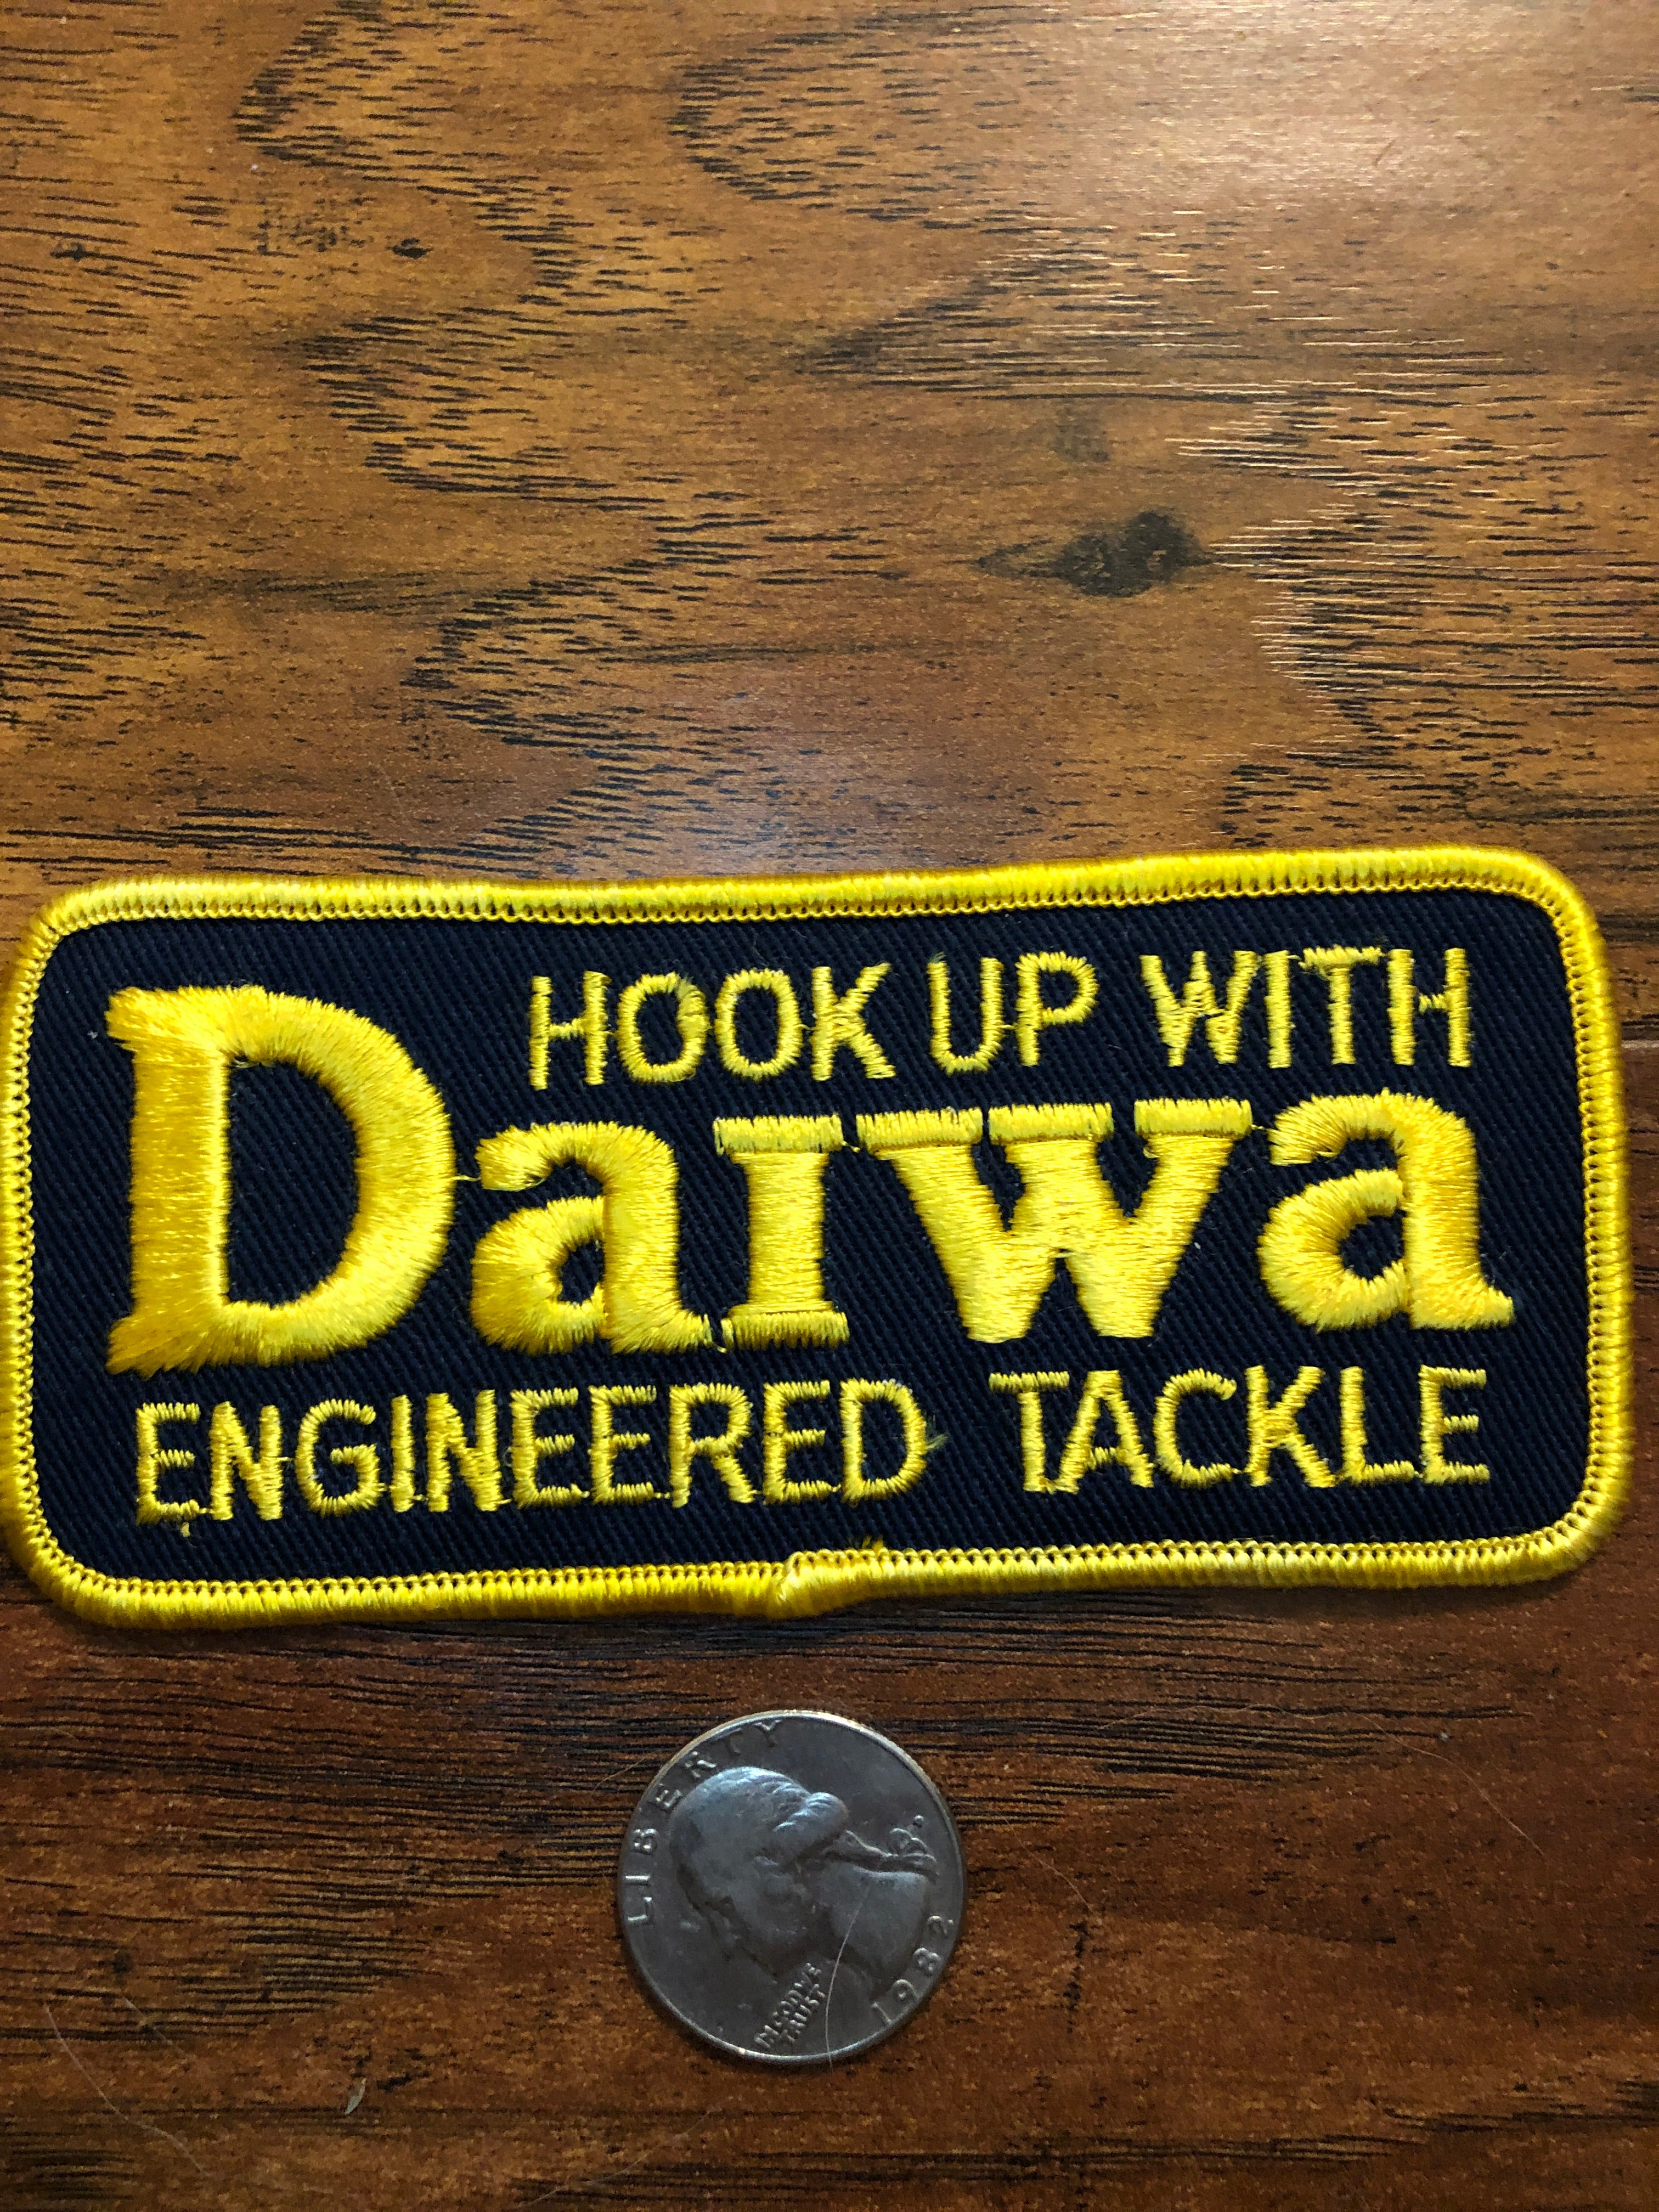 Vintage Hook Up With Daiwa Engineered Tackle - The Mad Hatter Company